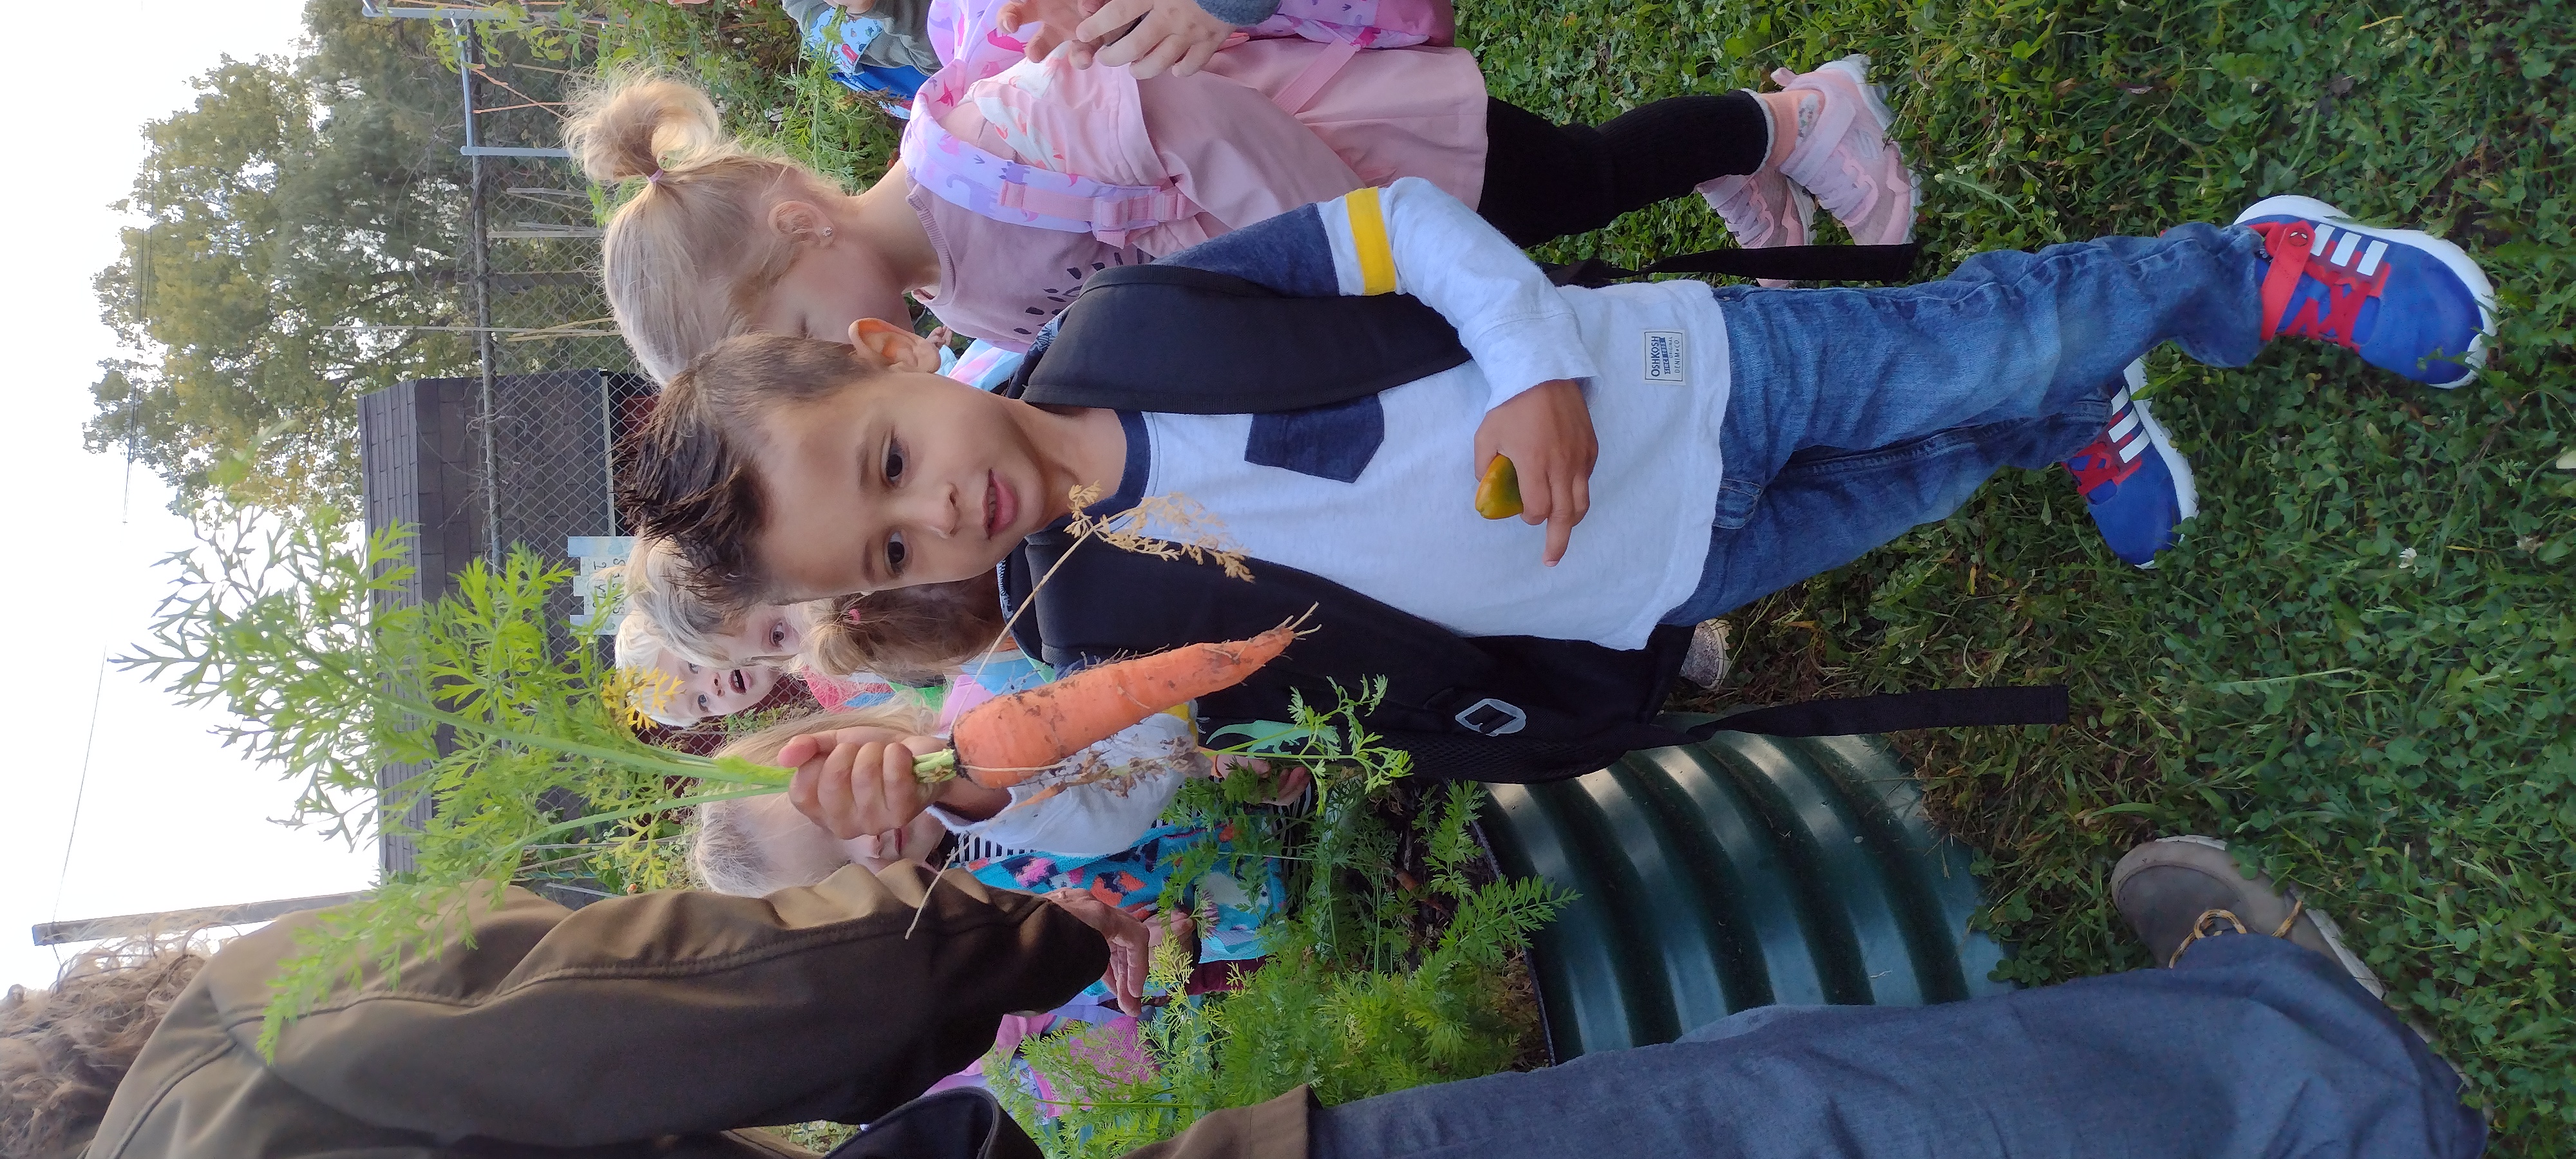 Picking carrots in the garden